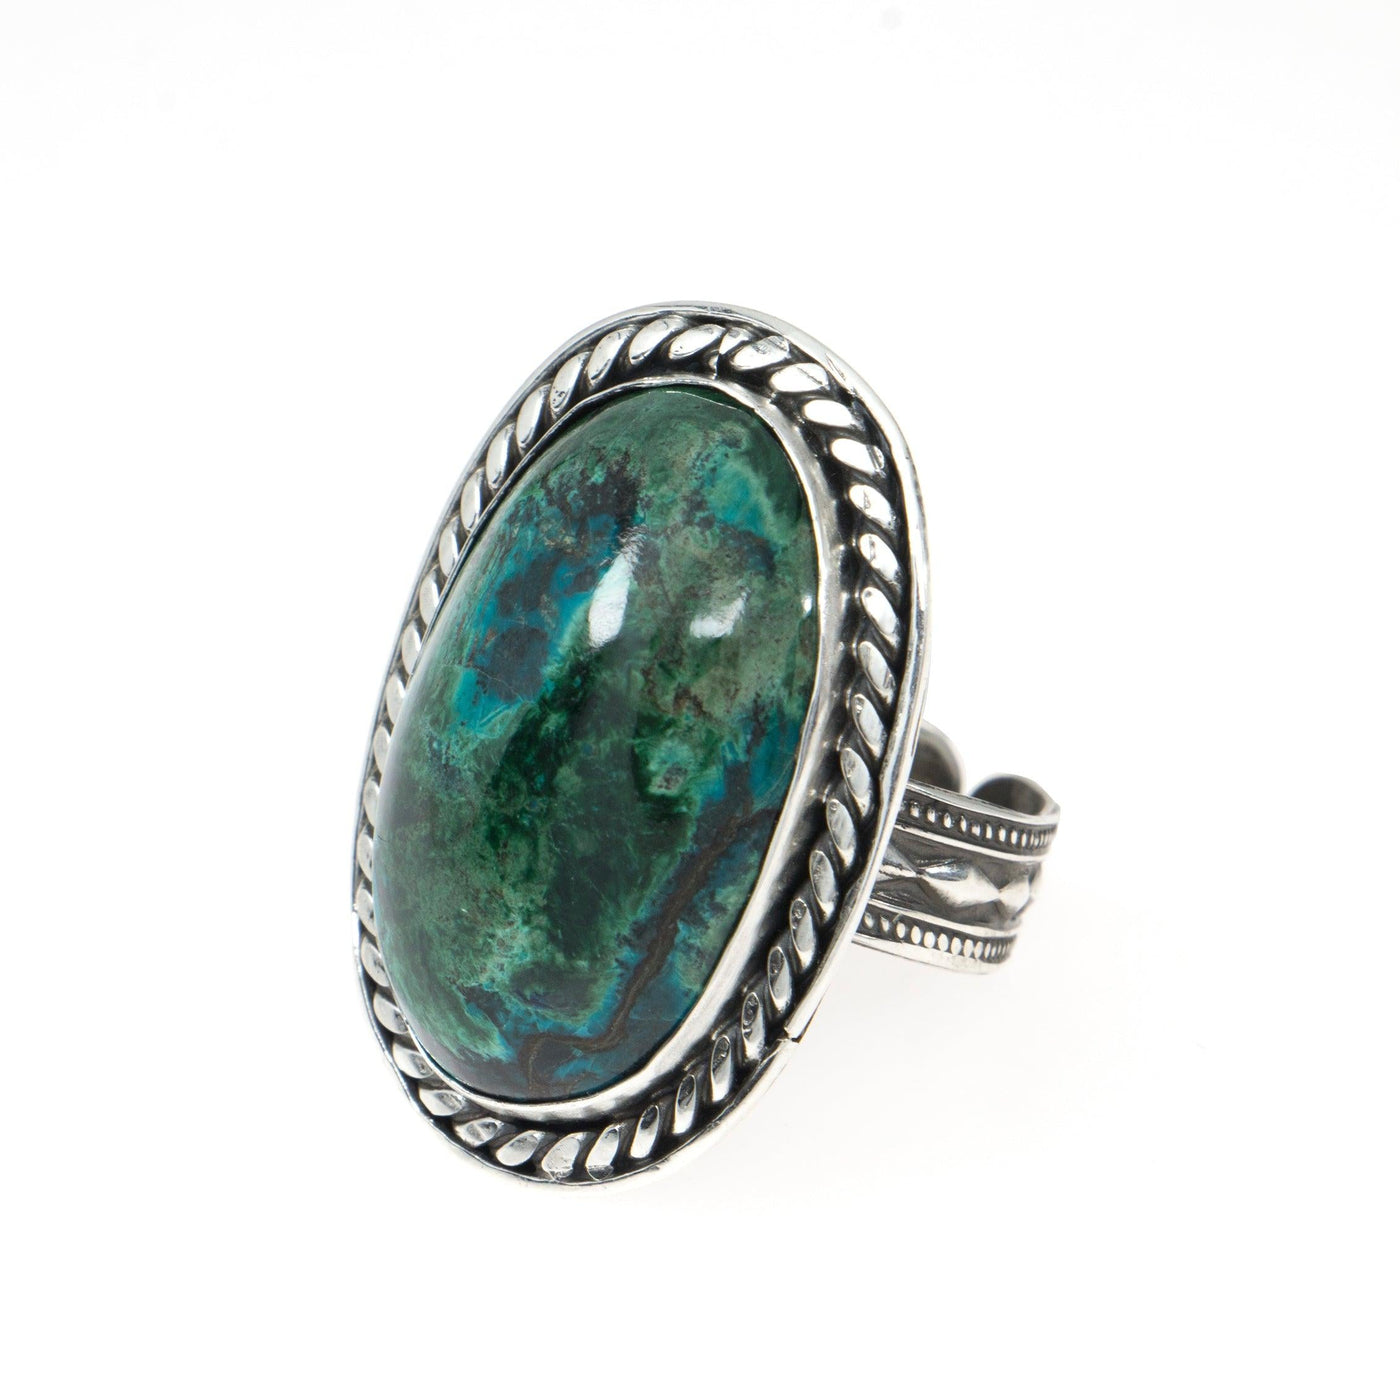 Eilat Stone Ring in 925 Sterling Silver #6 - Spring Nahal